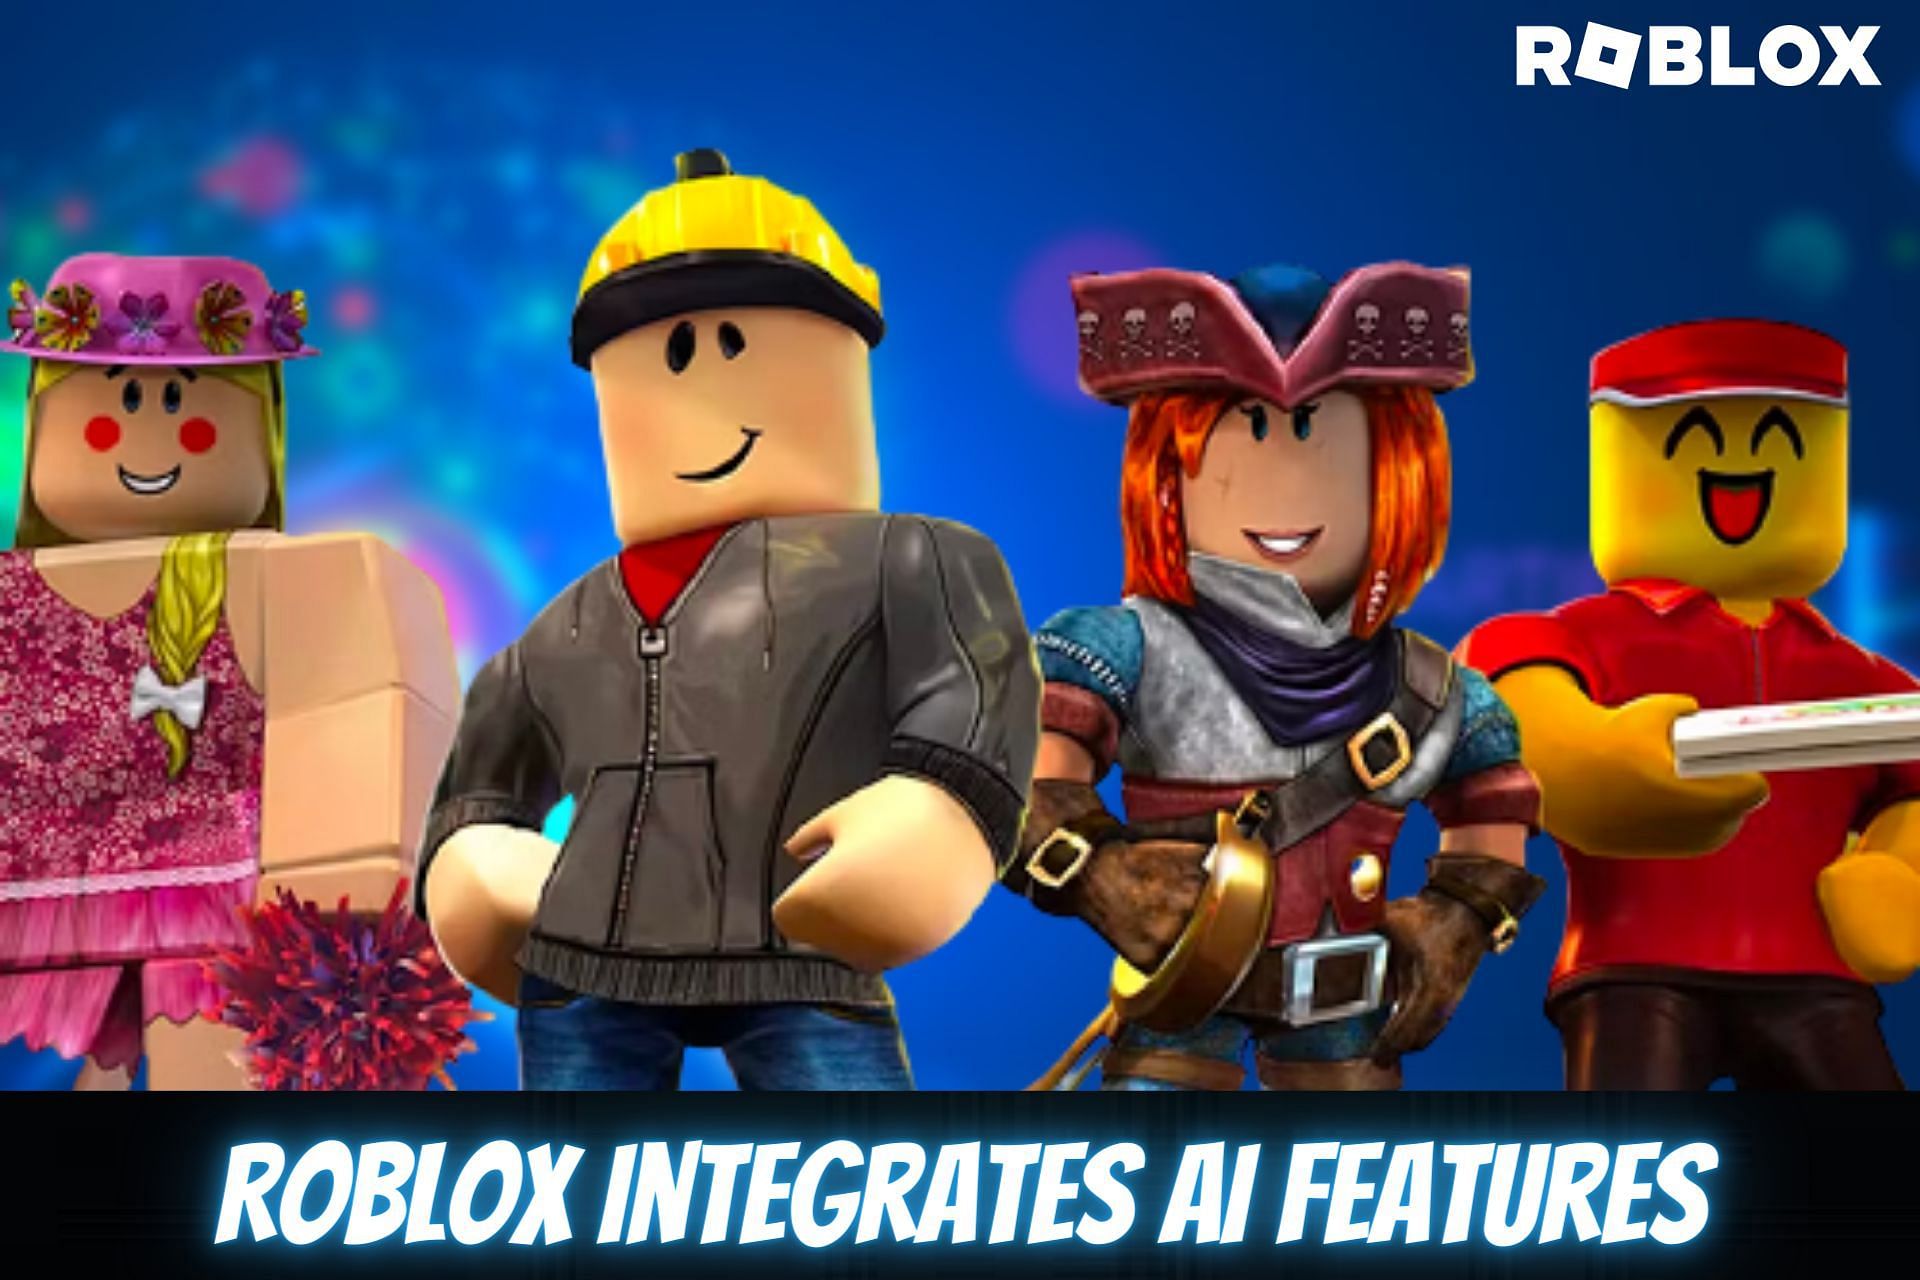 Roblox integrates AI features